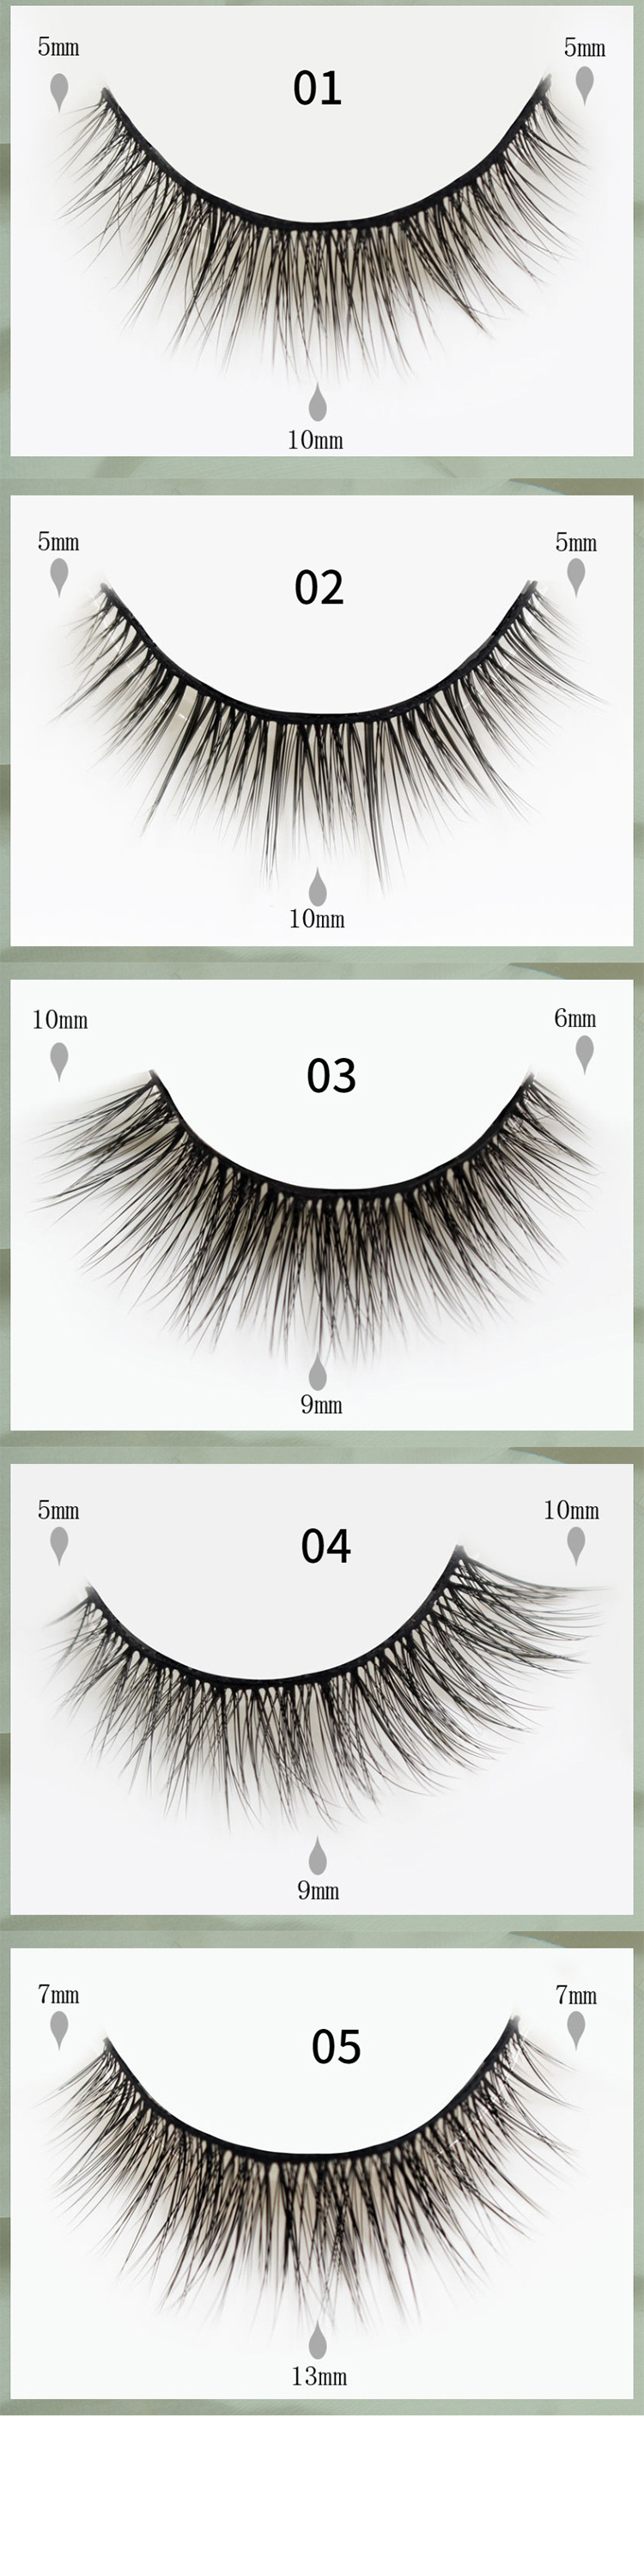 3d-magnetic-lashes-more-styles.jpg